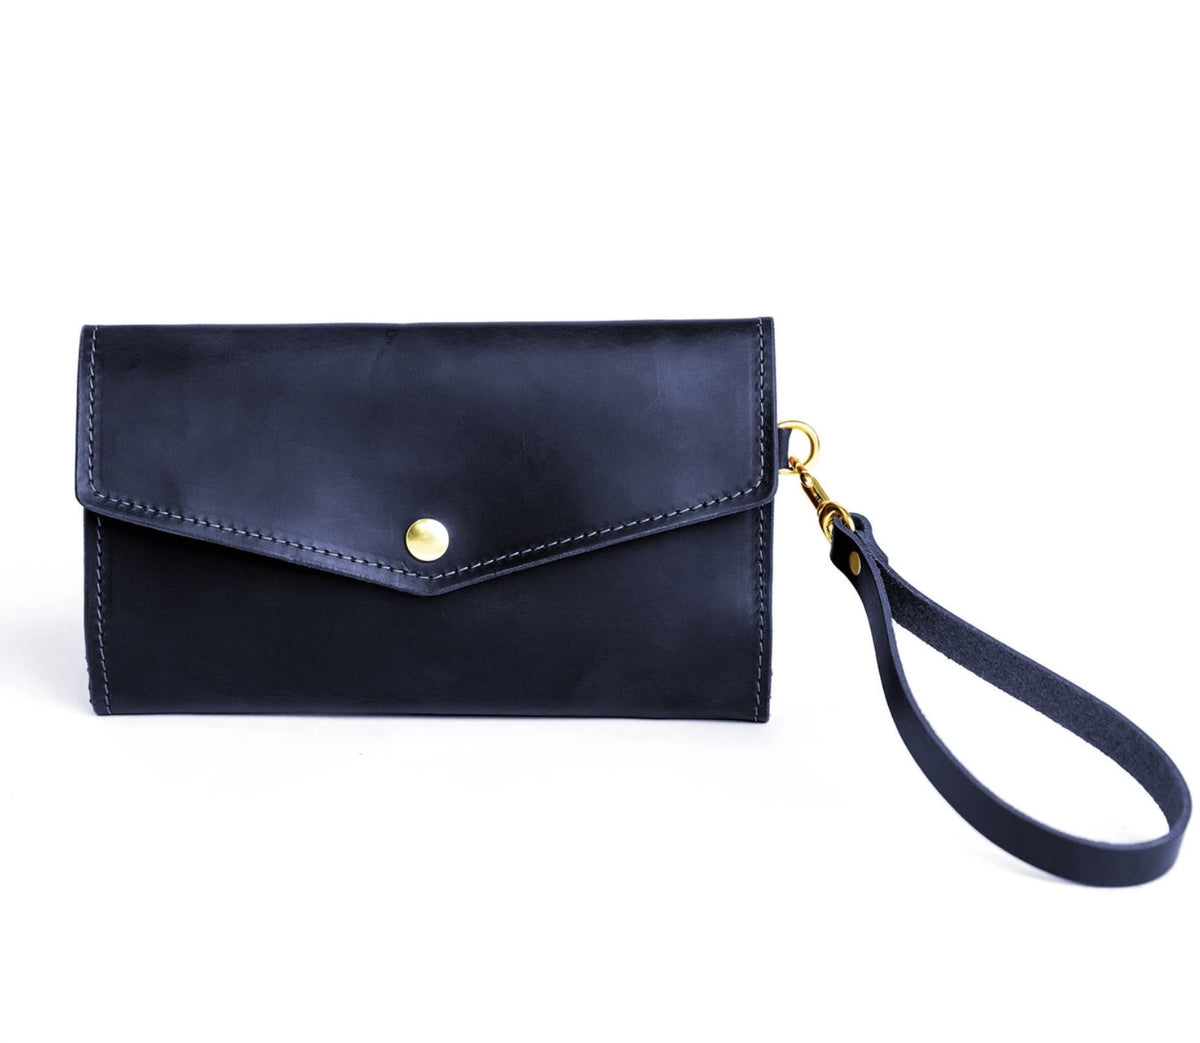 Bags & Luggage - Women's Bags - Clutches The Classy Clutch